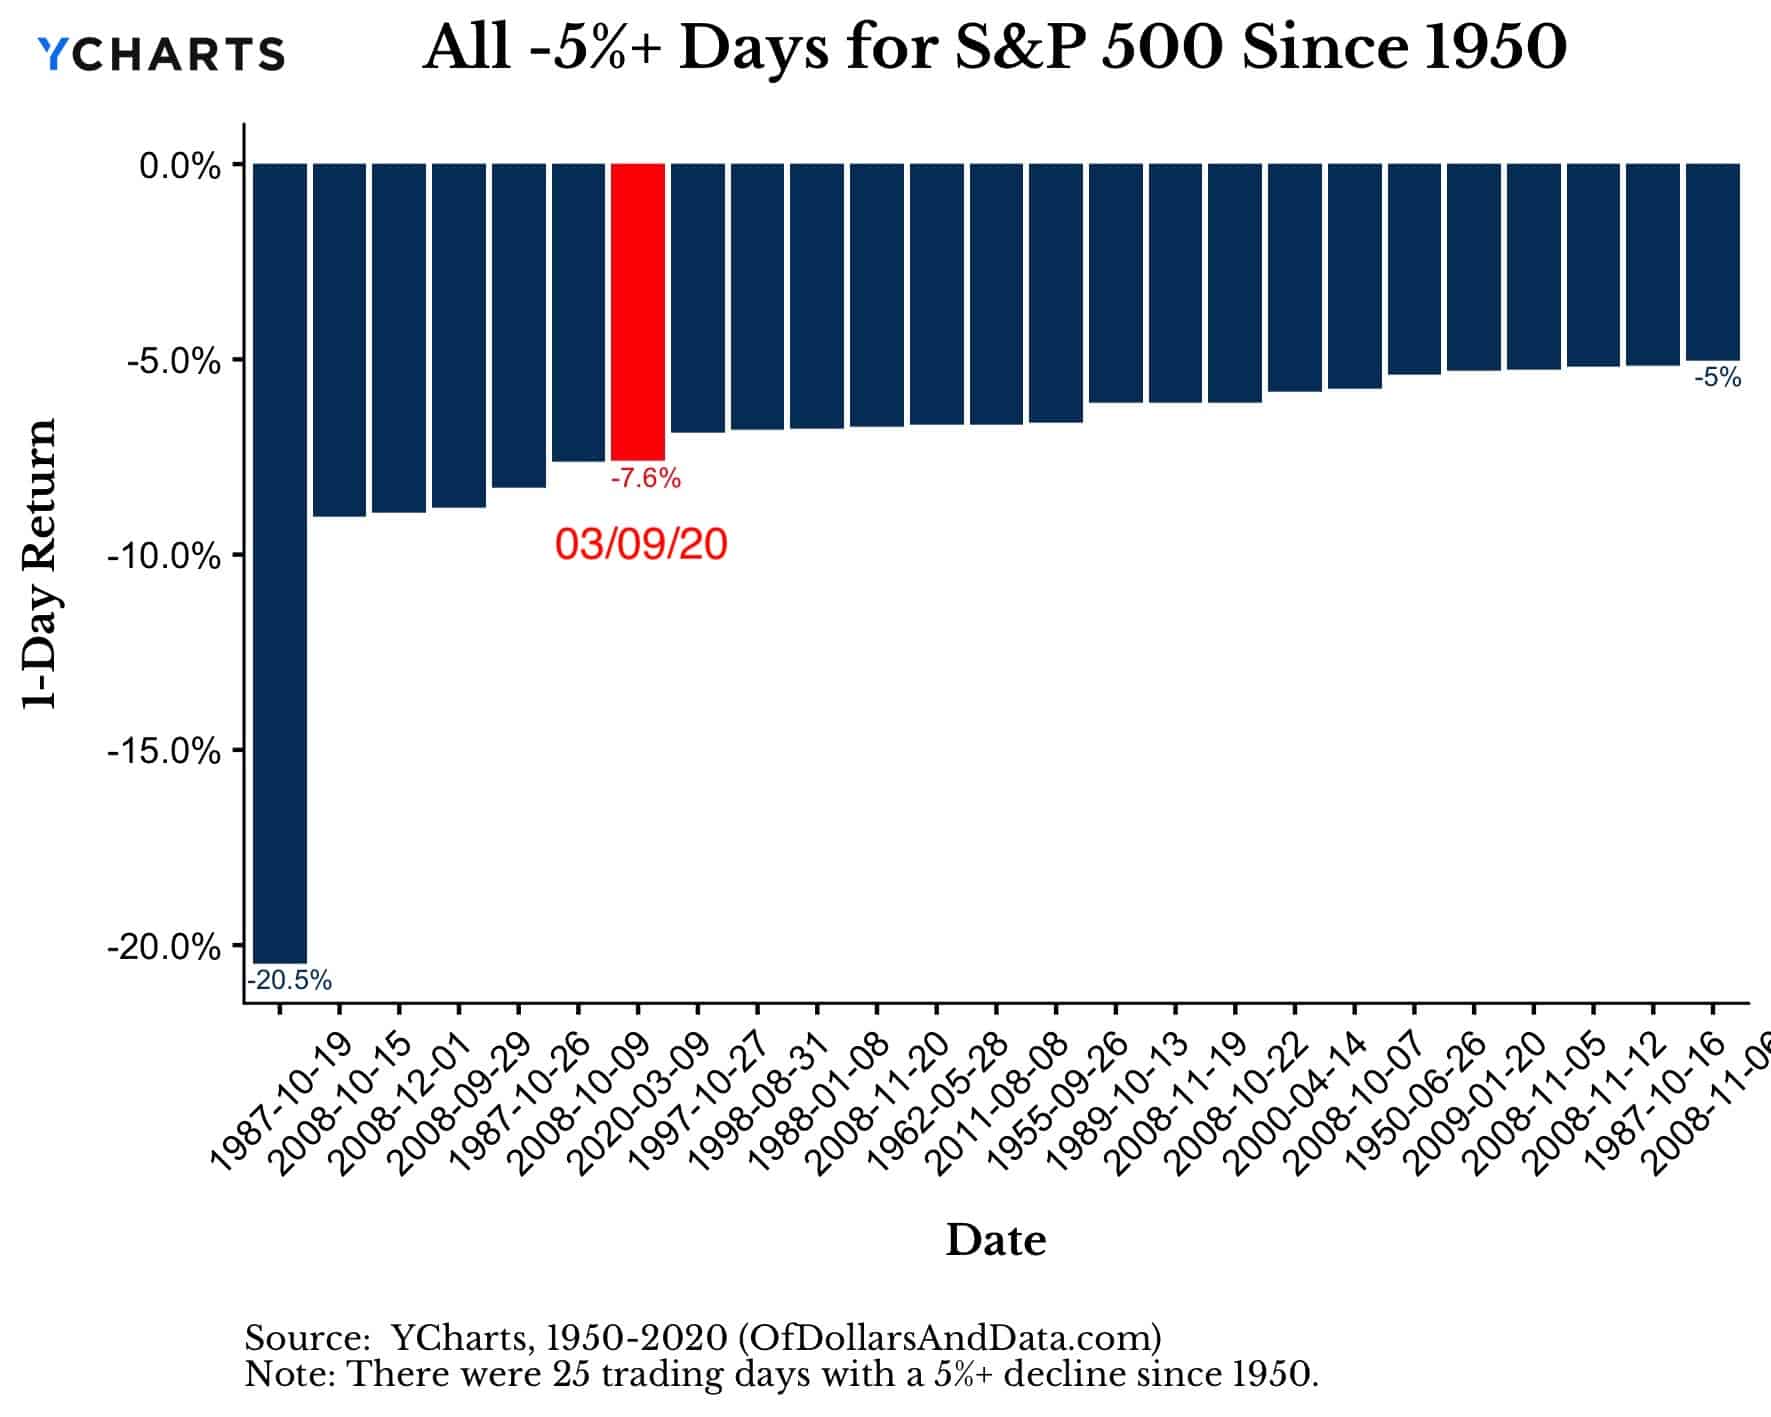 S&P 500 and all negative 5% or greater days since 1950 ranked.